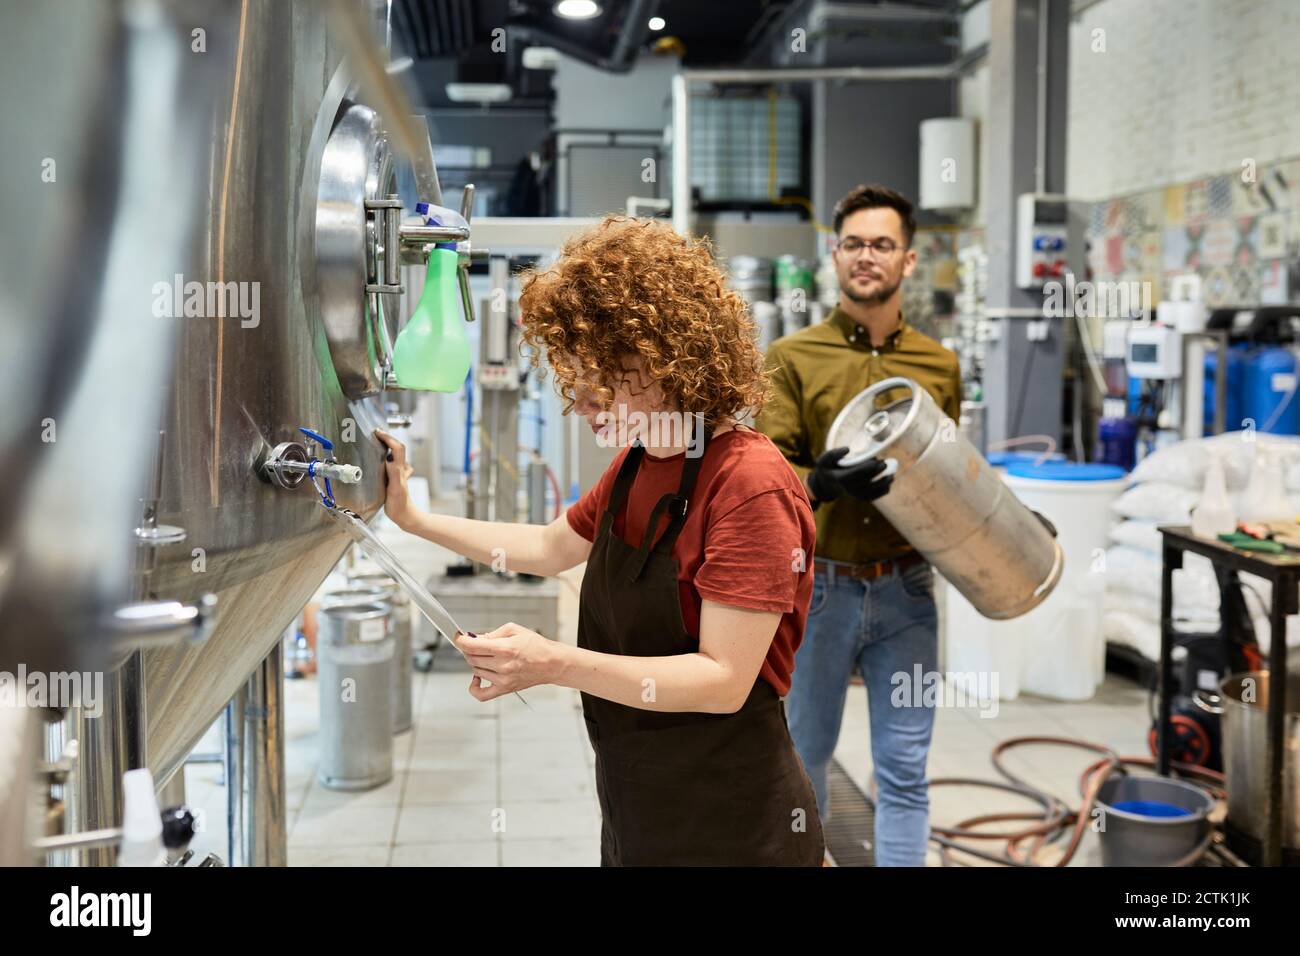 Man and woman working in craft brewery Stock Photo